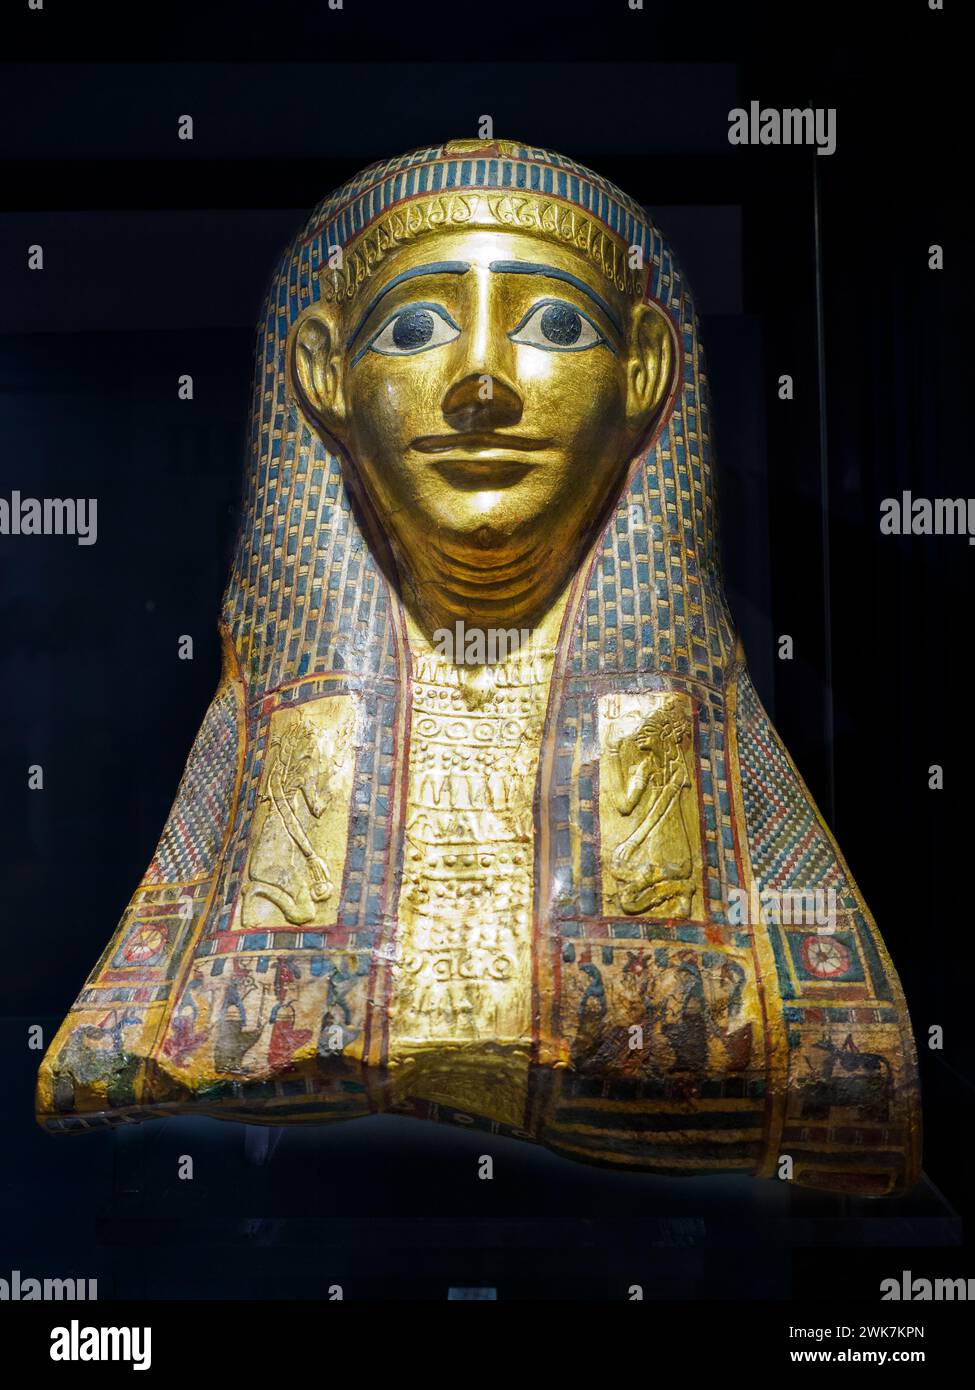 Mummy mask - Ptolemaic period (late 1st century BC) - Pressed, plastered and painted cloth - Museo di Scultura Antica Giovanni Barracco, Rome, Italy Stock Photo